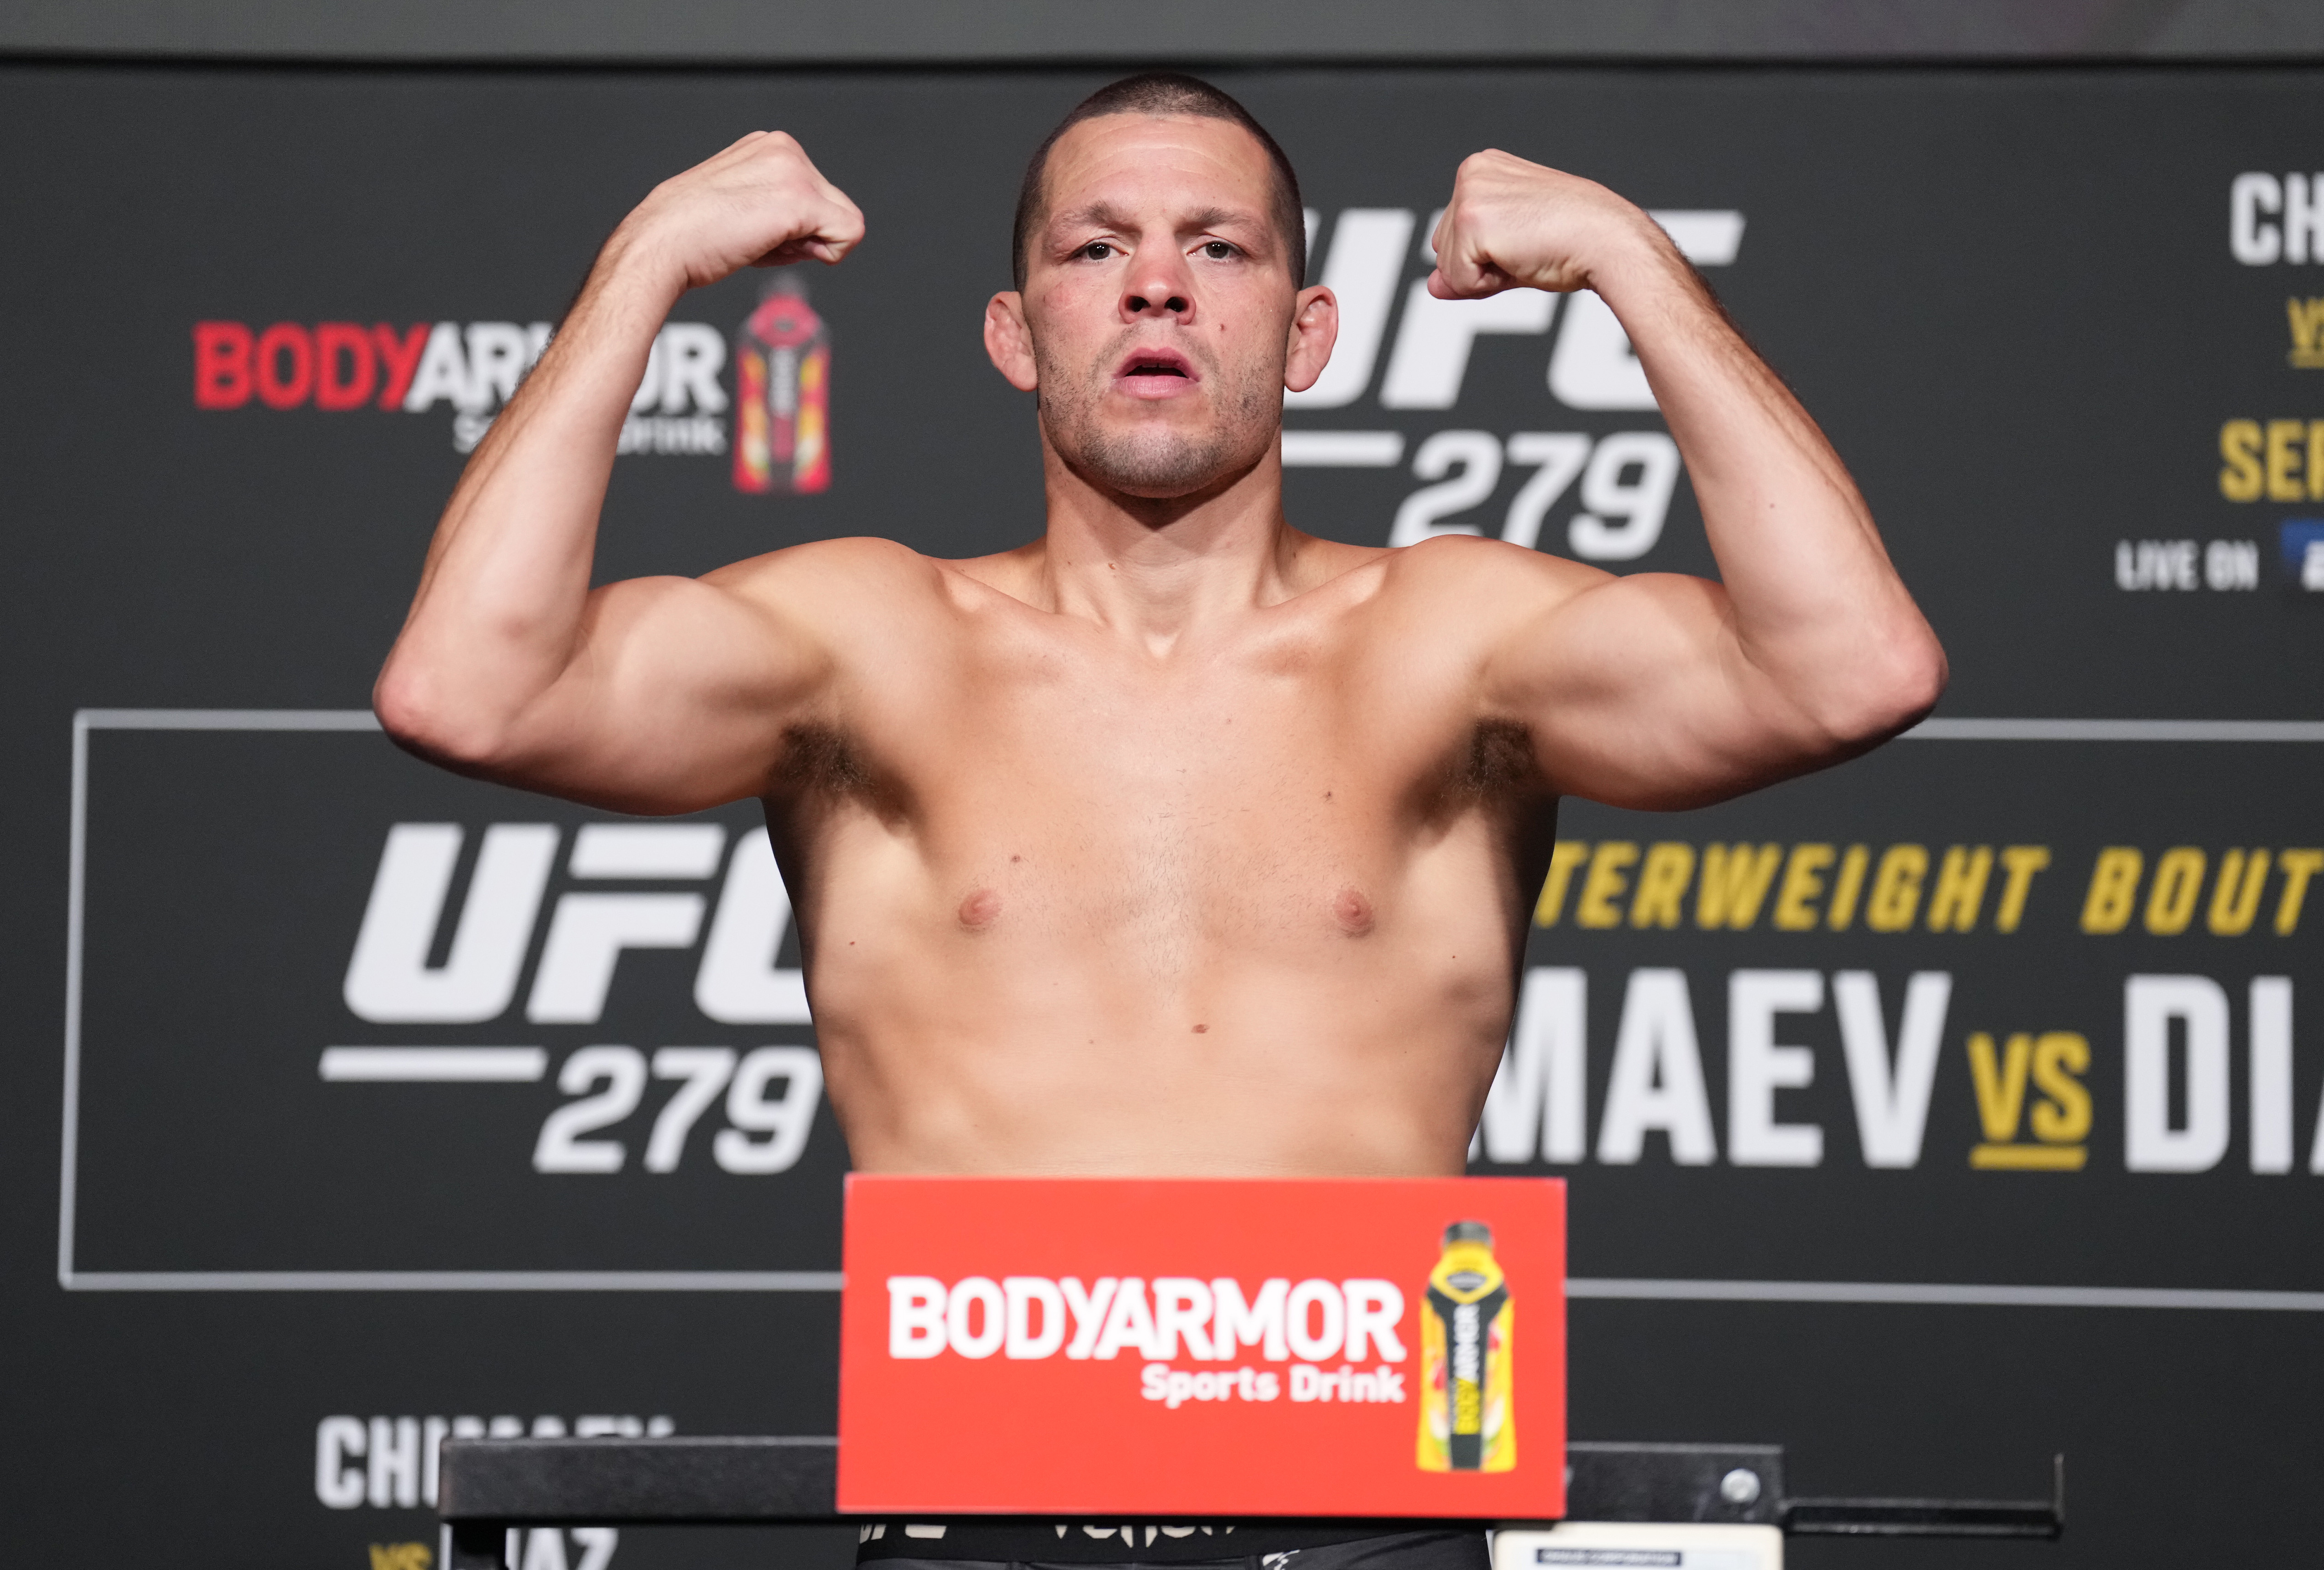 Nate Diaz poses on the scale during the UFC 279 official weigh-in at UFC APEX on September 09, 2022 in Las Vegas, Nevada.